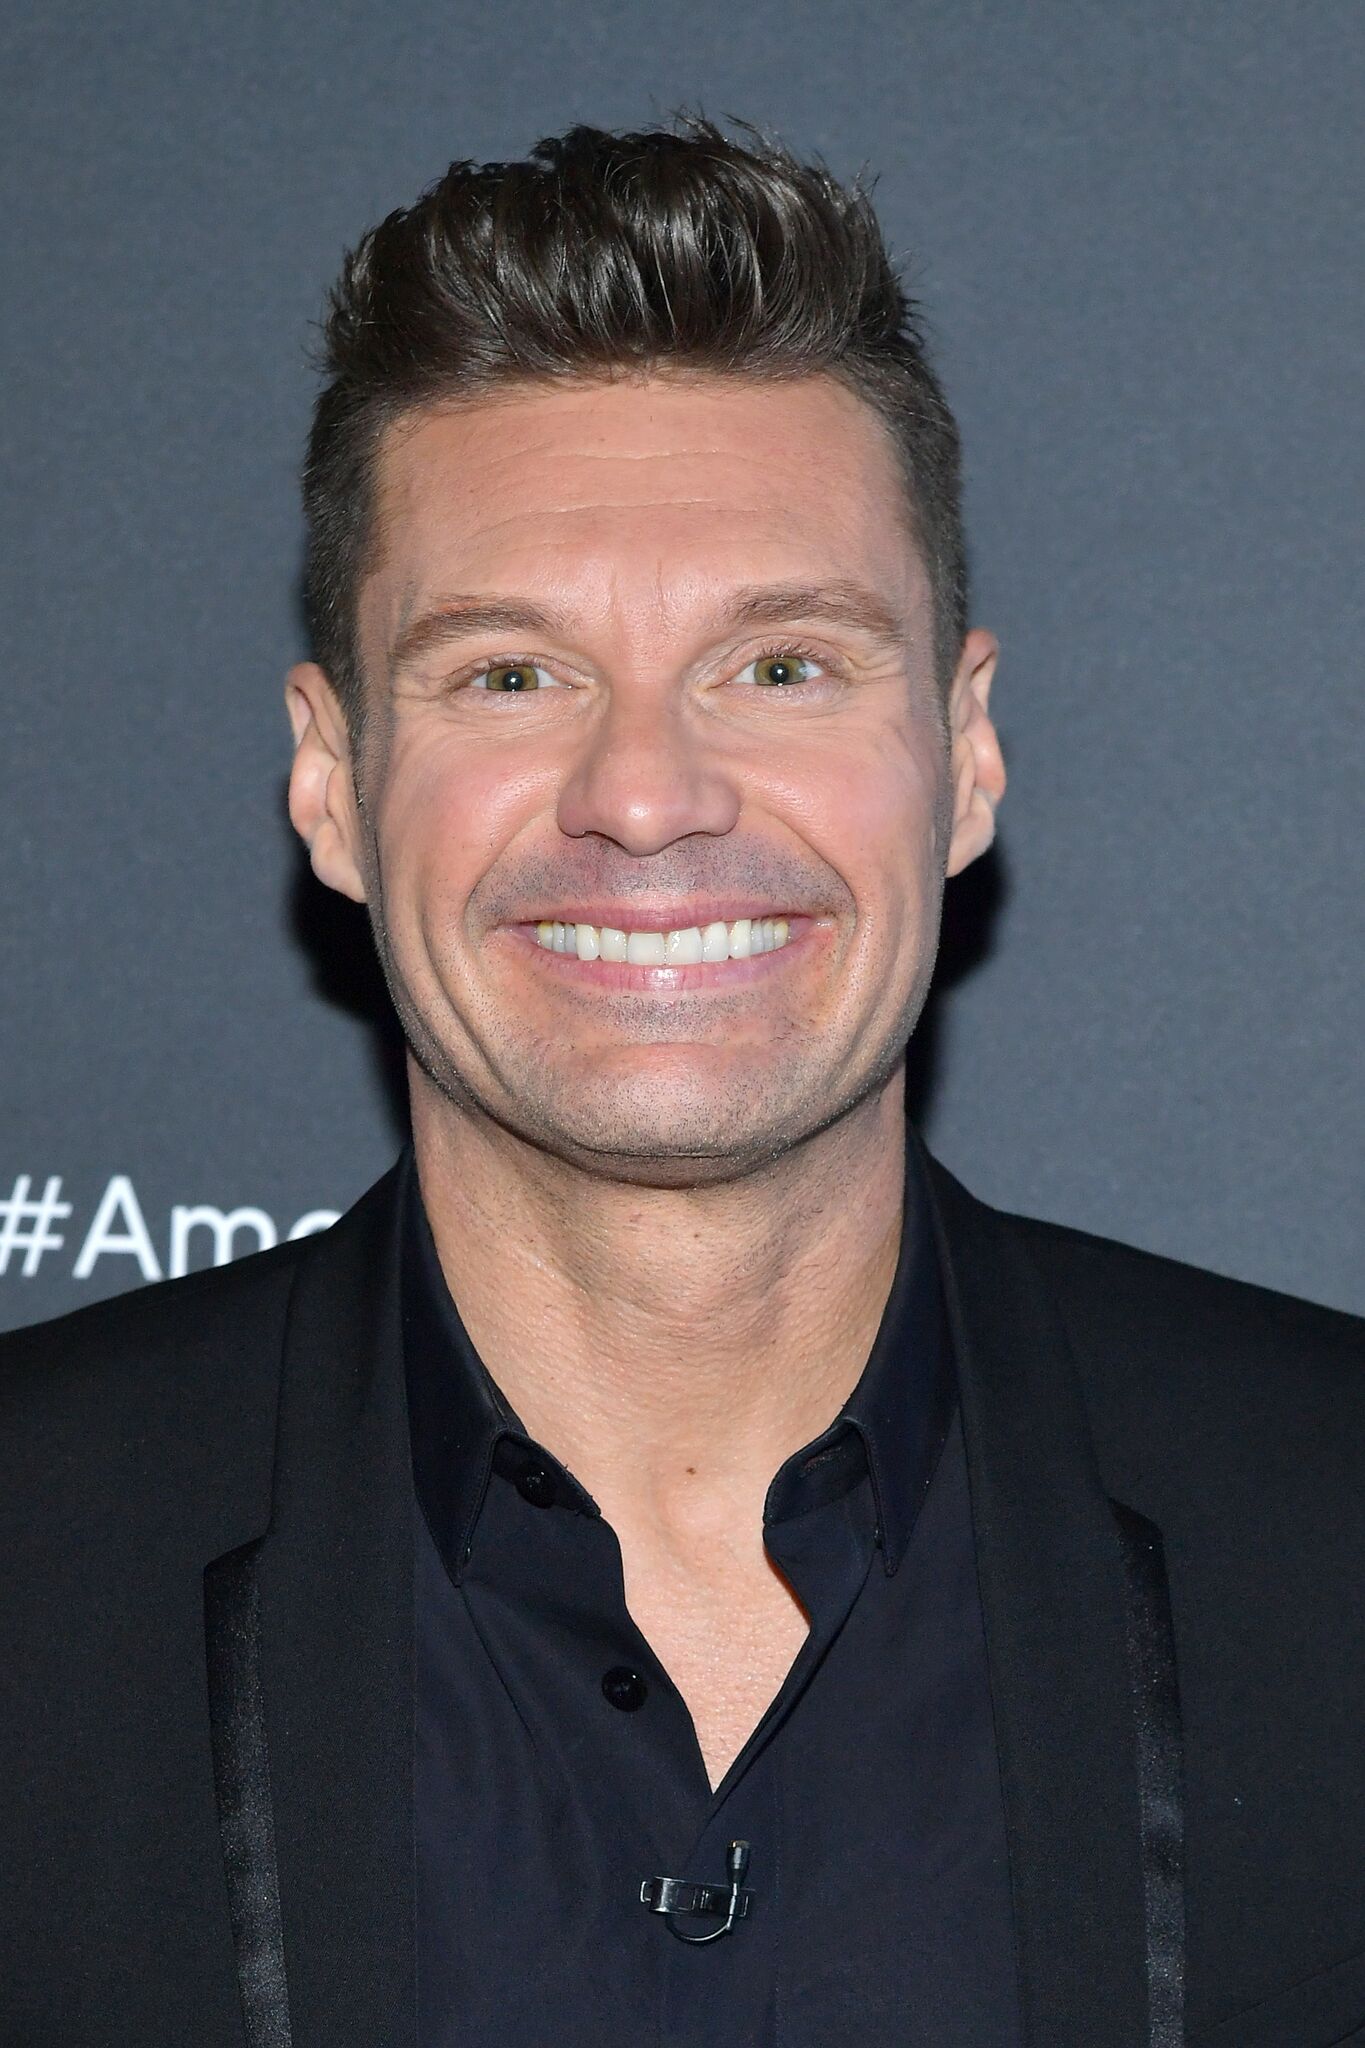 Ryan Seacrest attends the taping of ABC's "American Idol"  | Getty Images